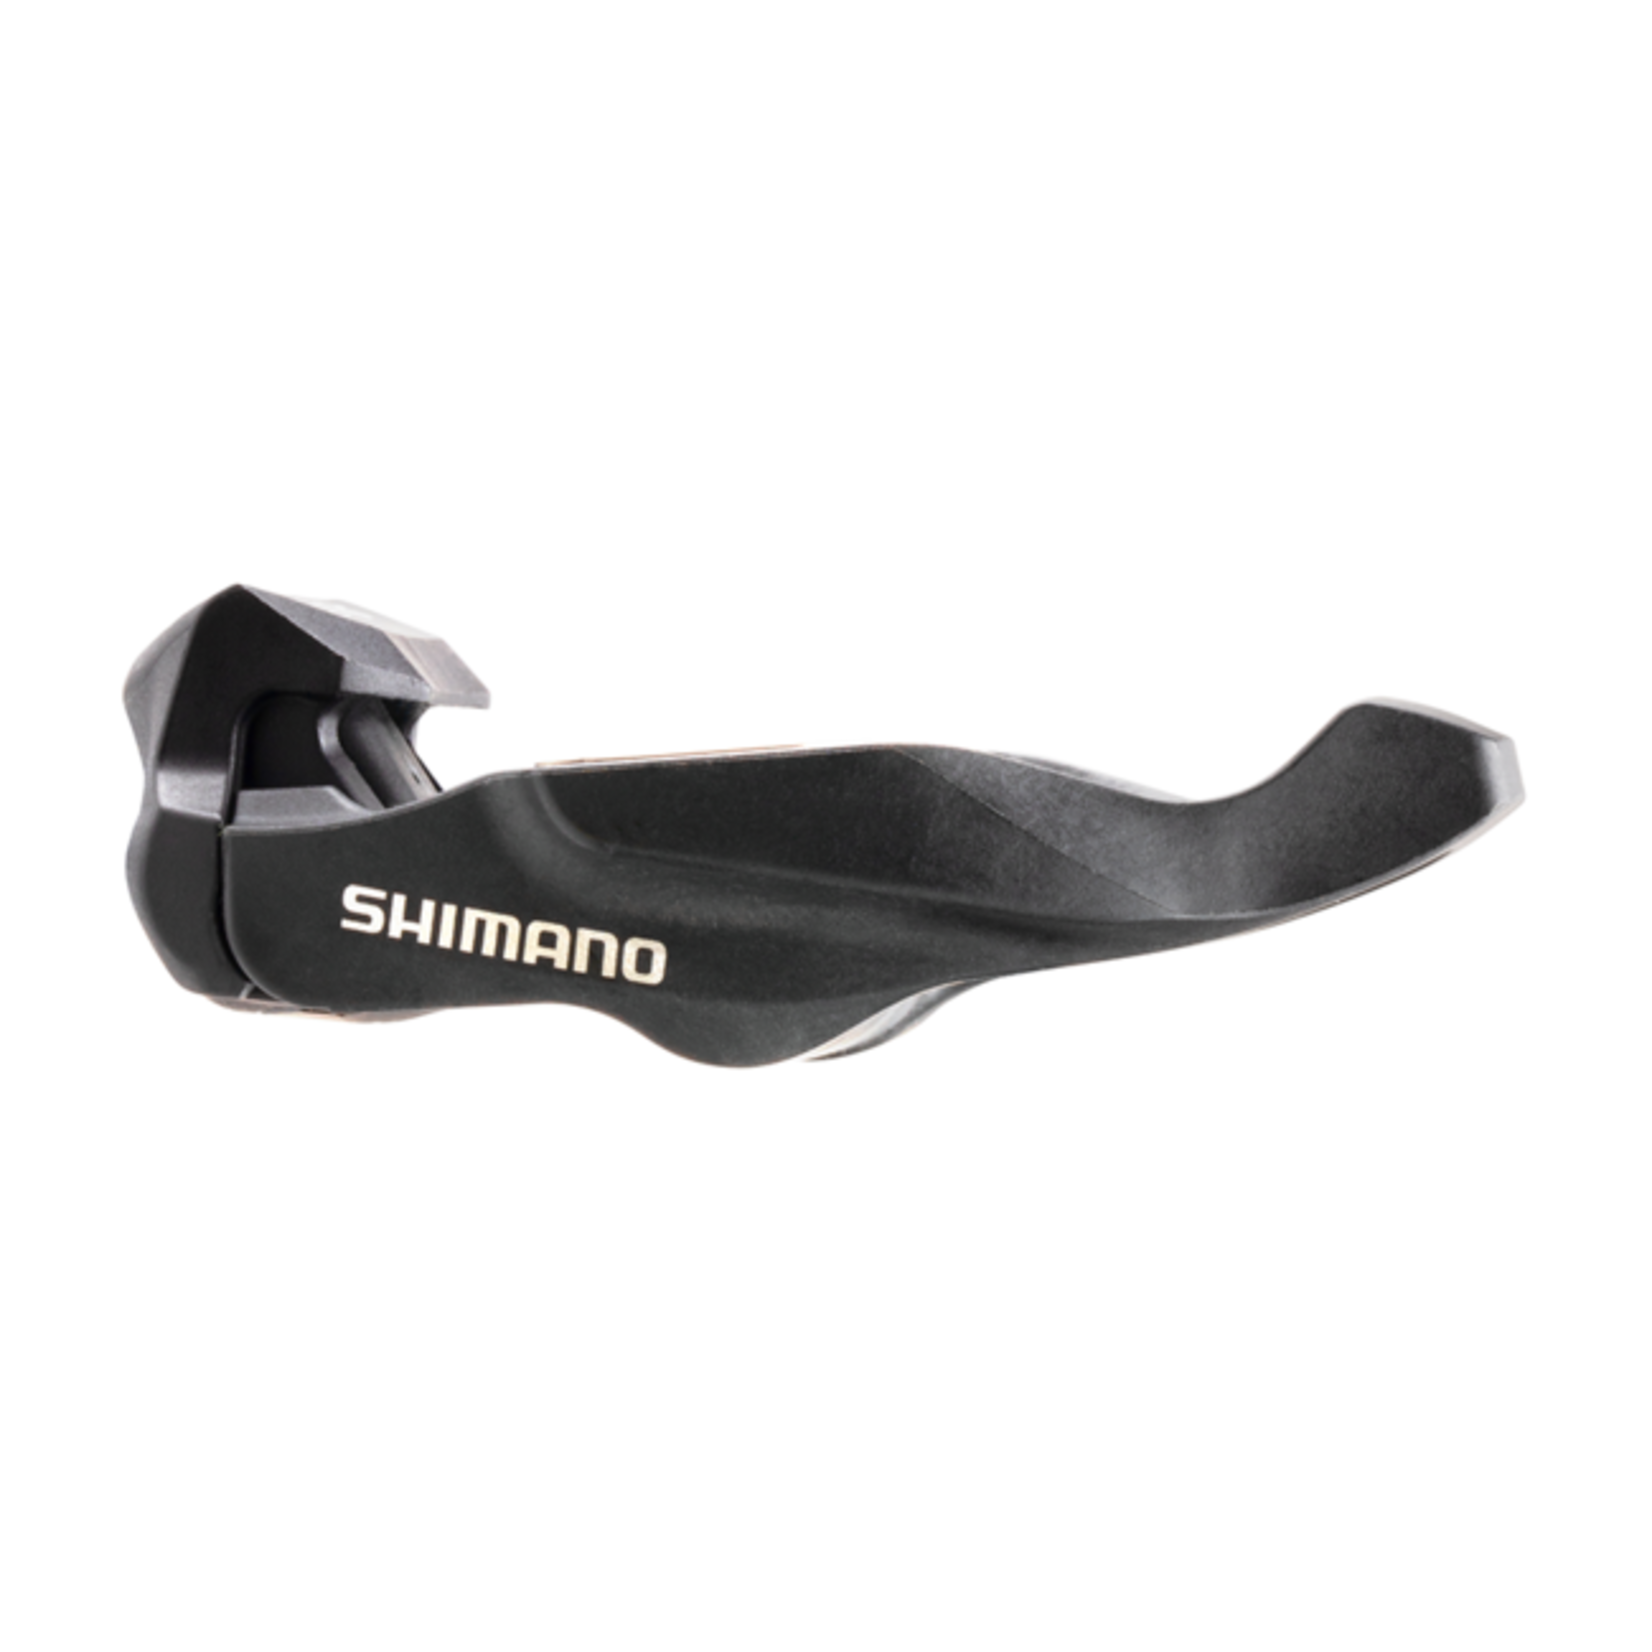 Shimano PD-RS500 SPD-SL Pedal with Cleat